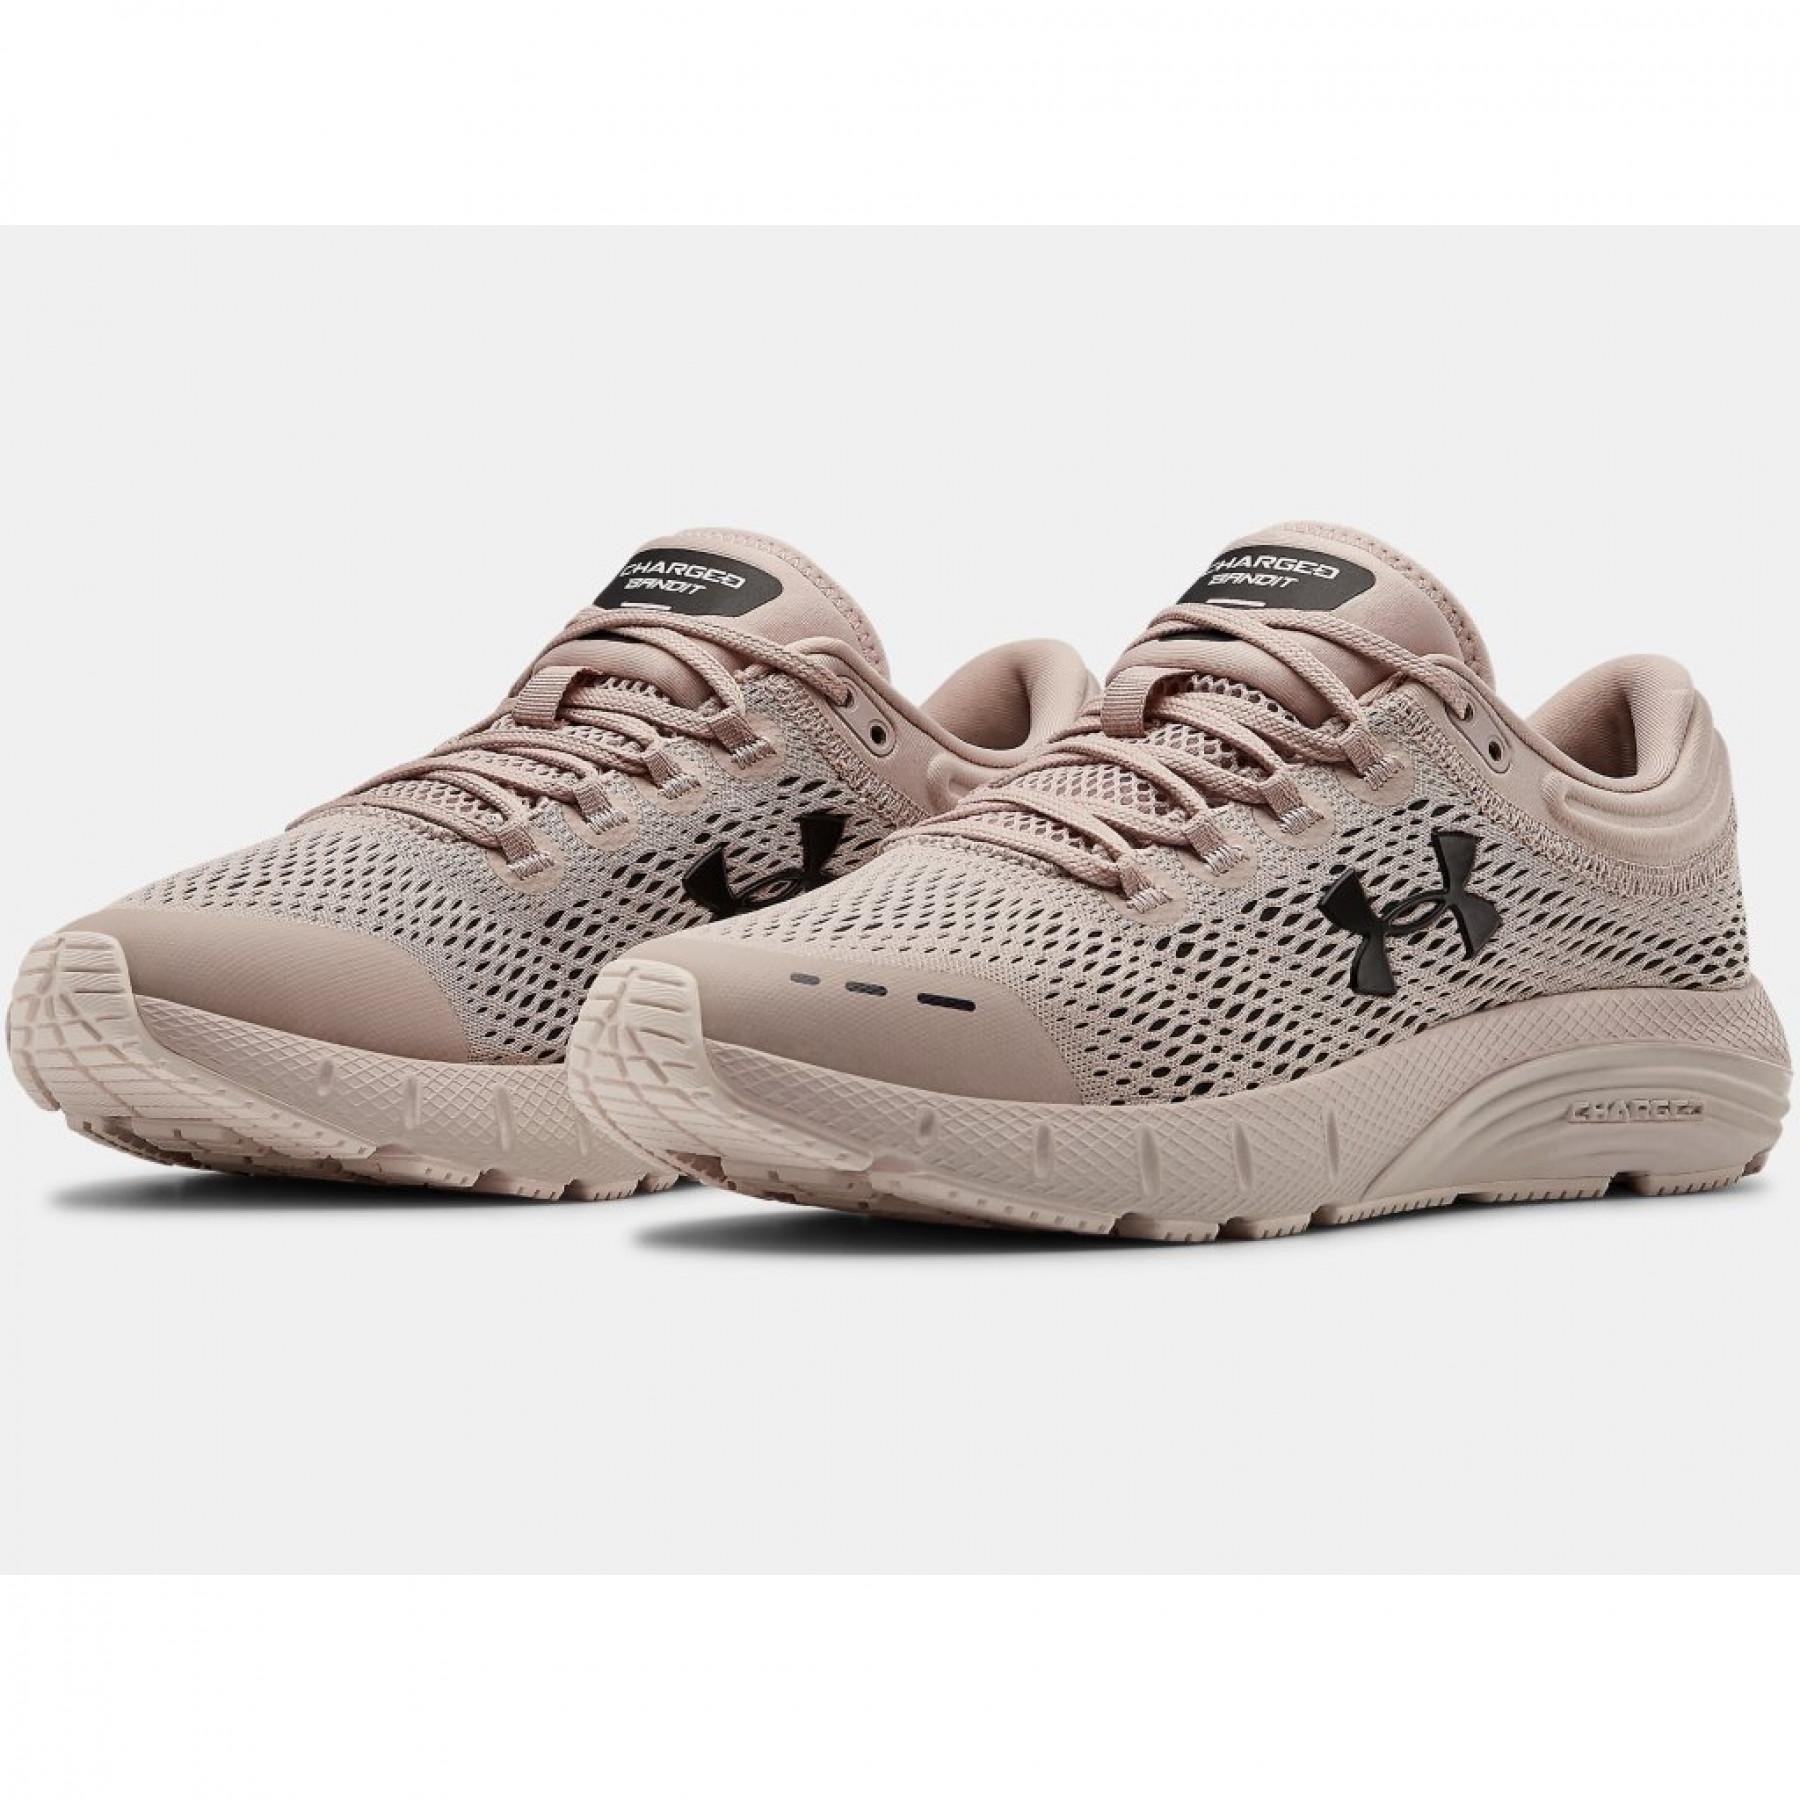 Zapatos de mujer Under Armour Charged Bandit 5